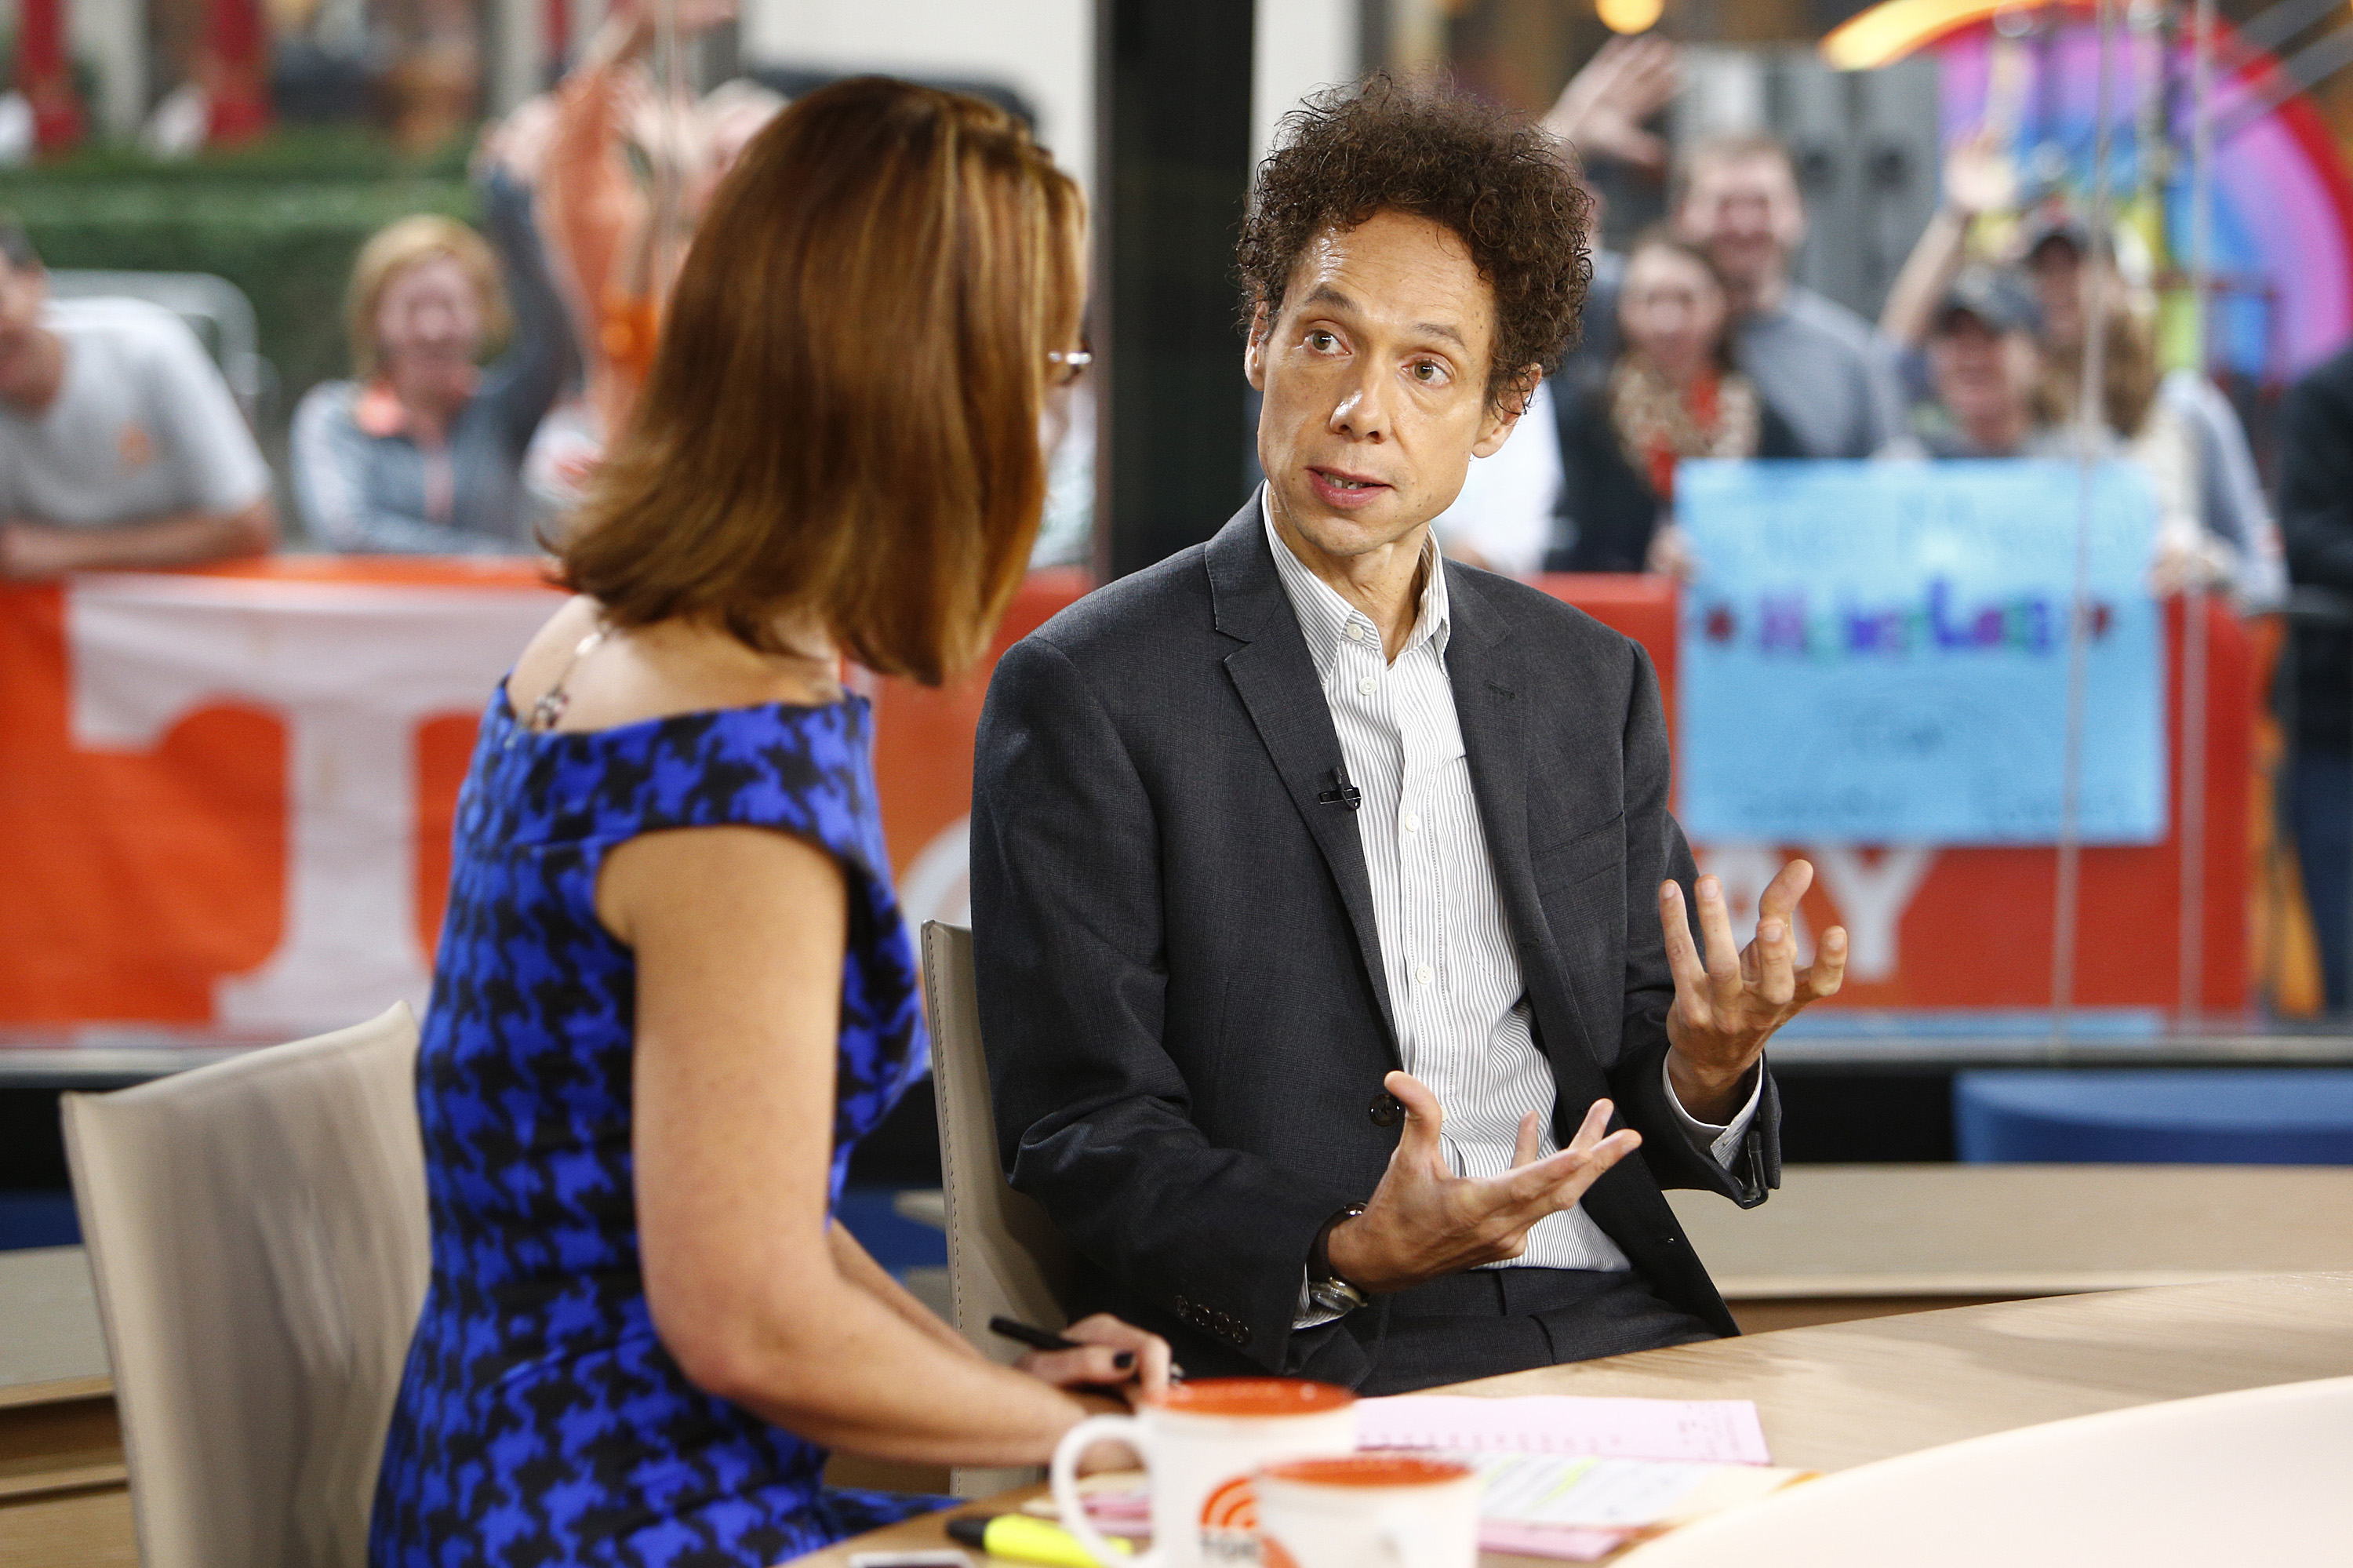 Pictured: Malcolm Gladwell appears on NBC News' "Today" show (NBC NewsWire—NBCU Photo Bank via Getty Images)